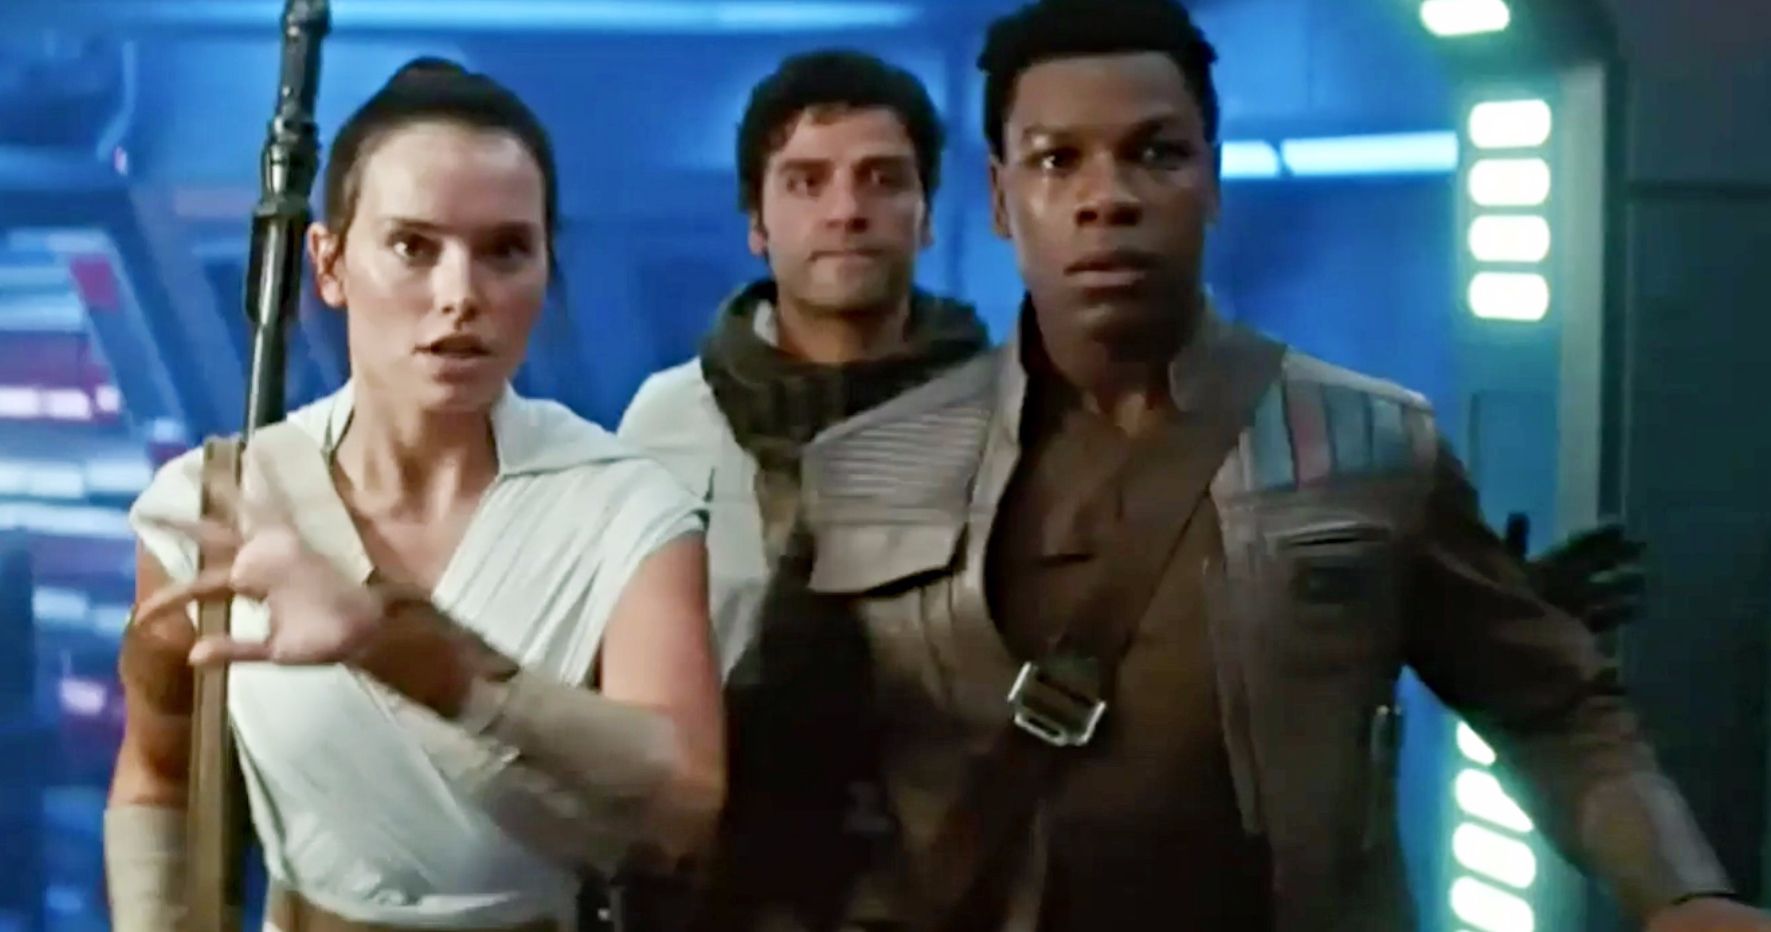 Tons of New Star Wars 9 Footage Arrives in 2 The Rise of Skywalker TV Spots